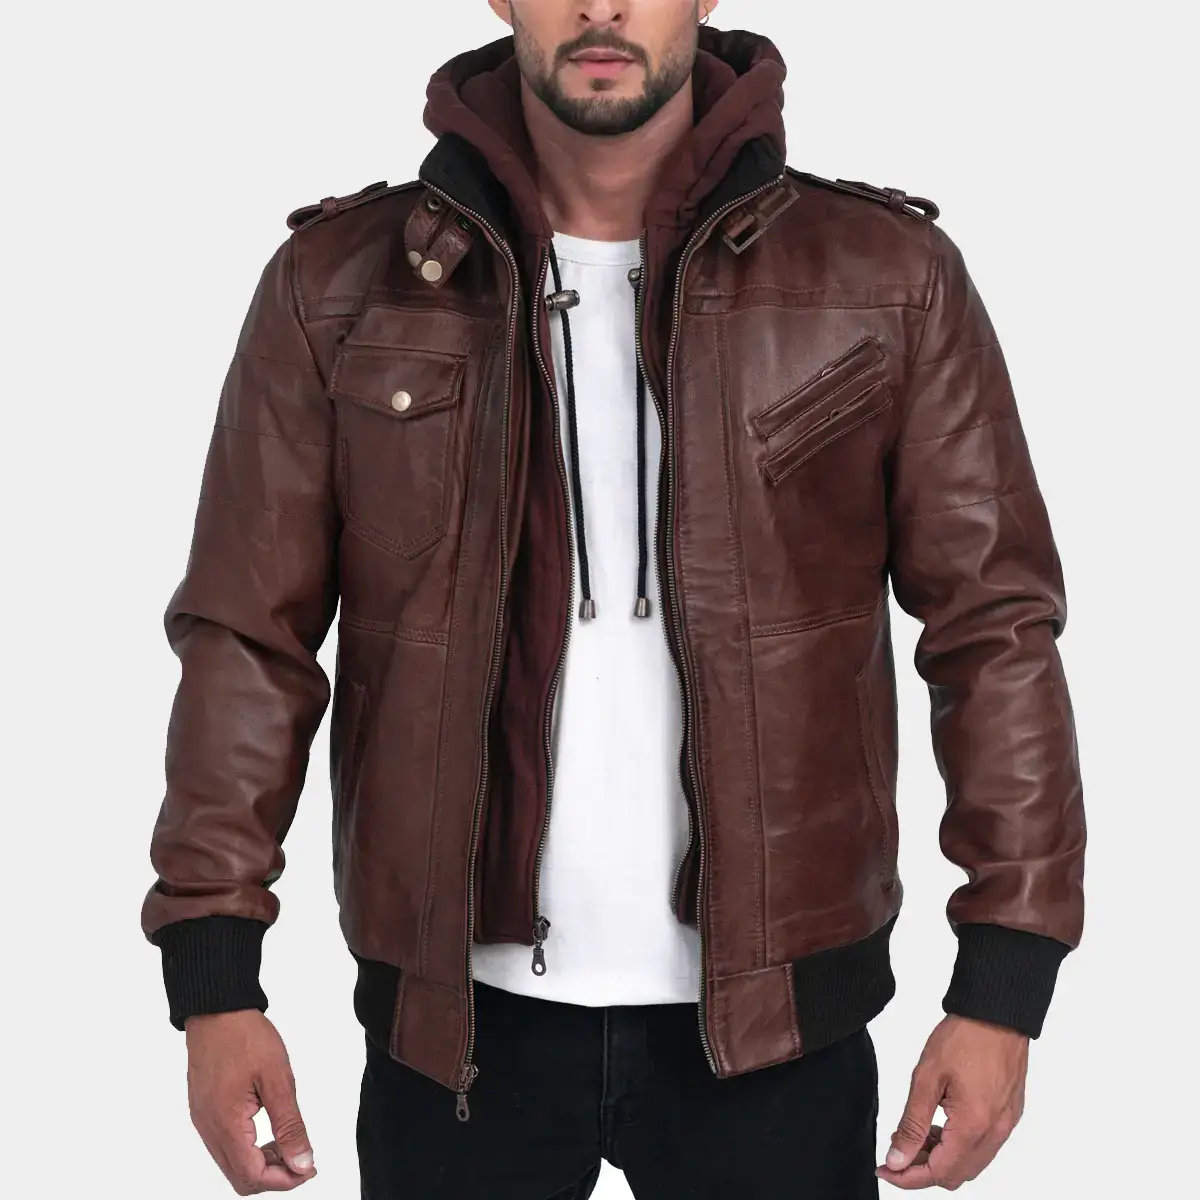 Brown Leather Jacket with Removable Hood – Real Leathers Jacket